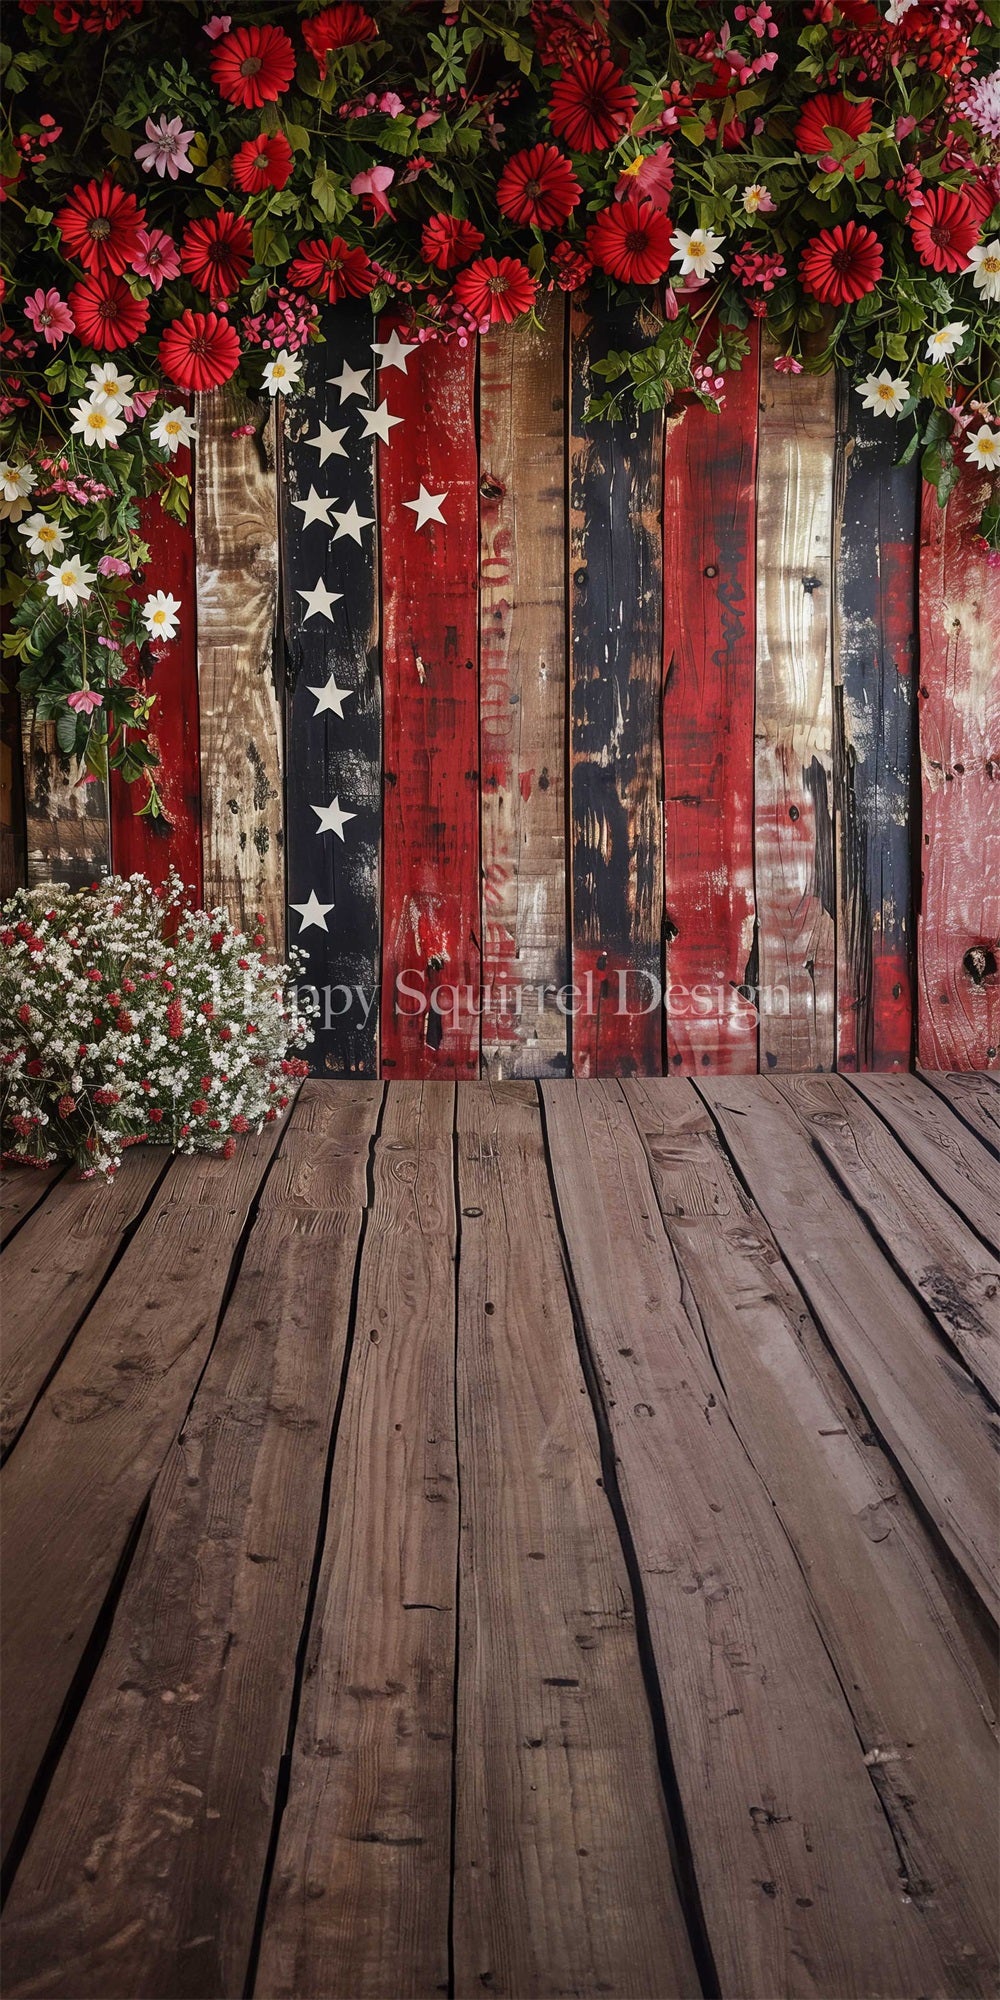 Kate Sweep Vintage White Star Fine Art Colorful Floral Wooden Wall Backdrop Designed by Happy Squirrel Design